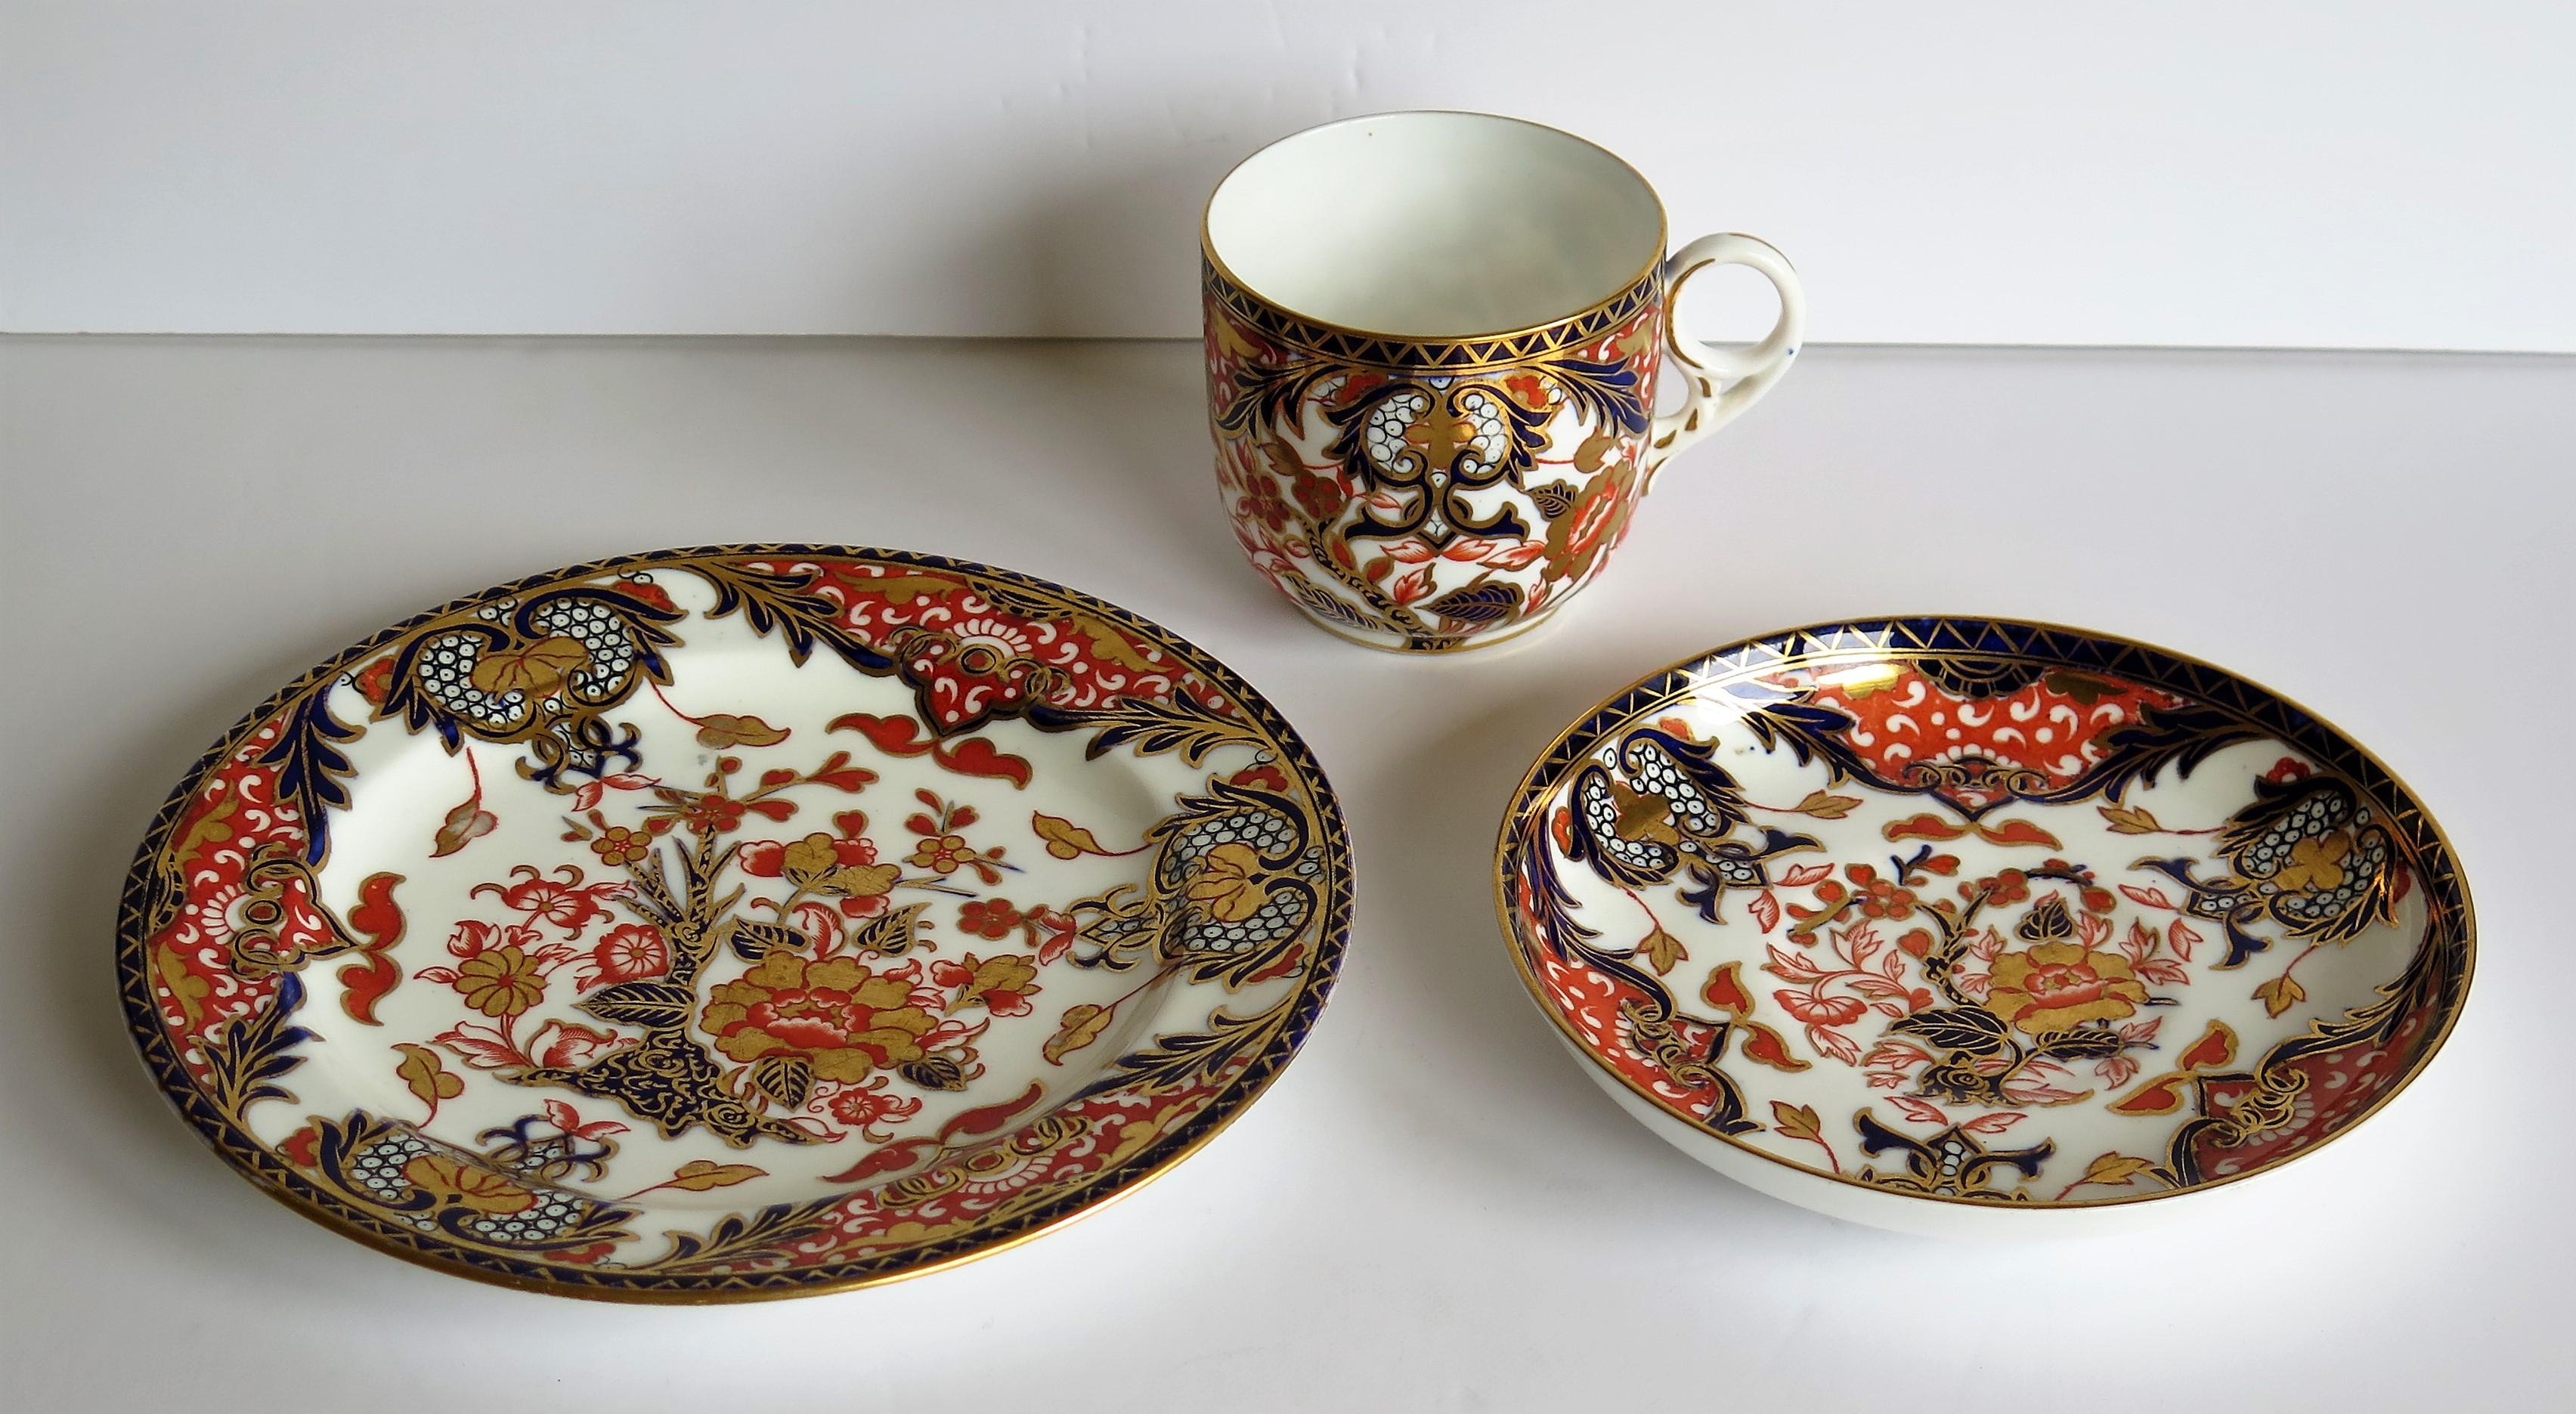 Hand-Painted 19th Century Royal Crown Derby Porcelain Trio in Old Japan Pattern, circa 1890